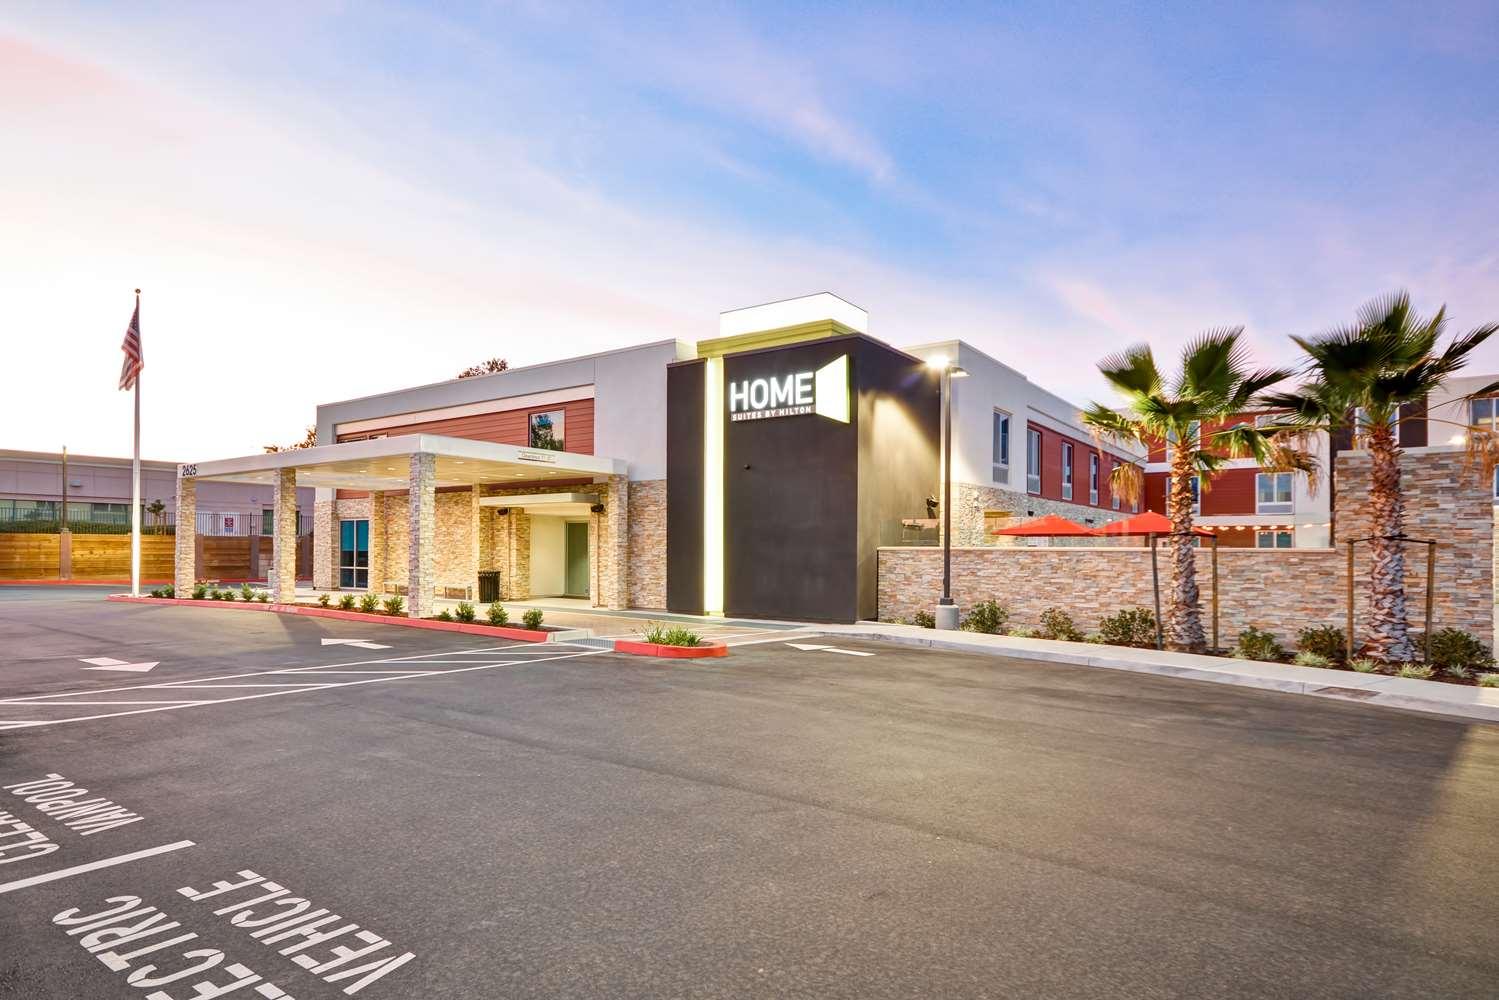 Home2 Suites by Hilton Livermore in Livermore, CA